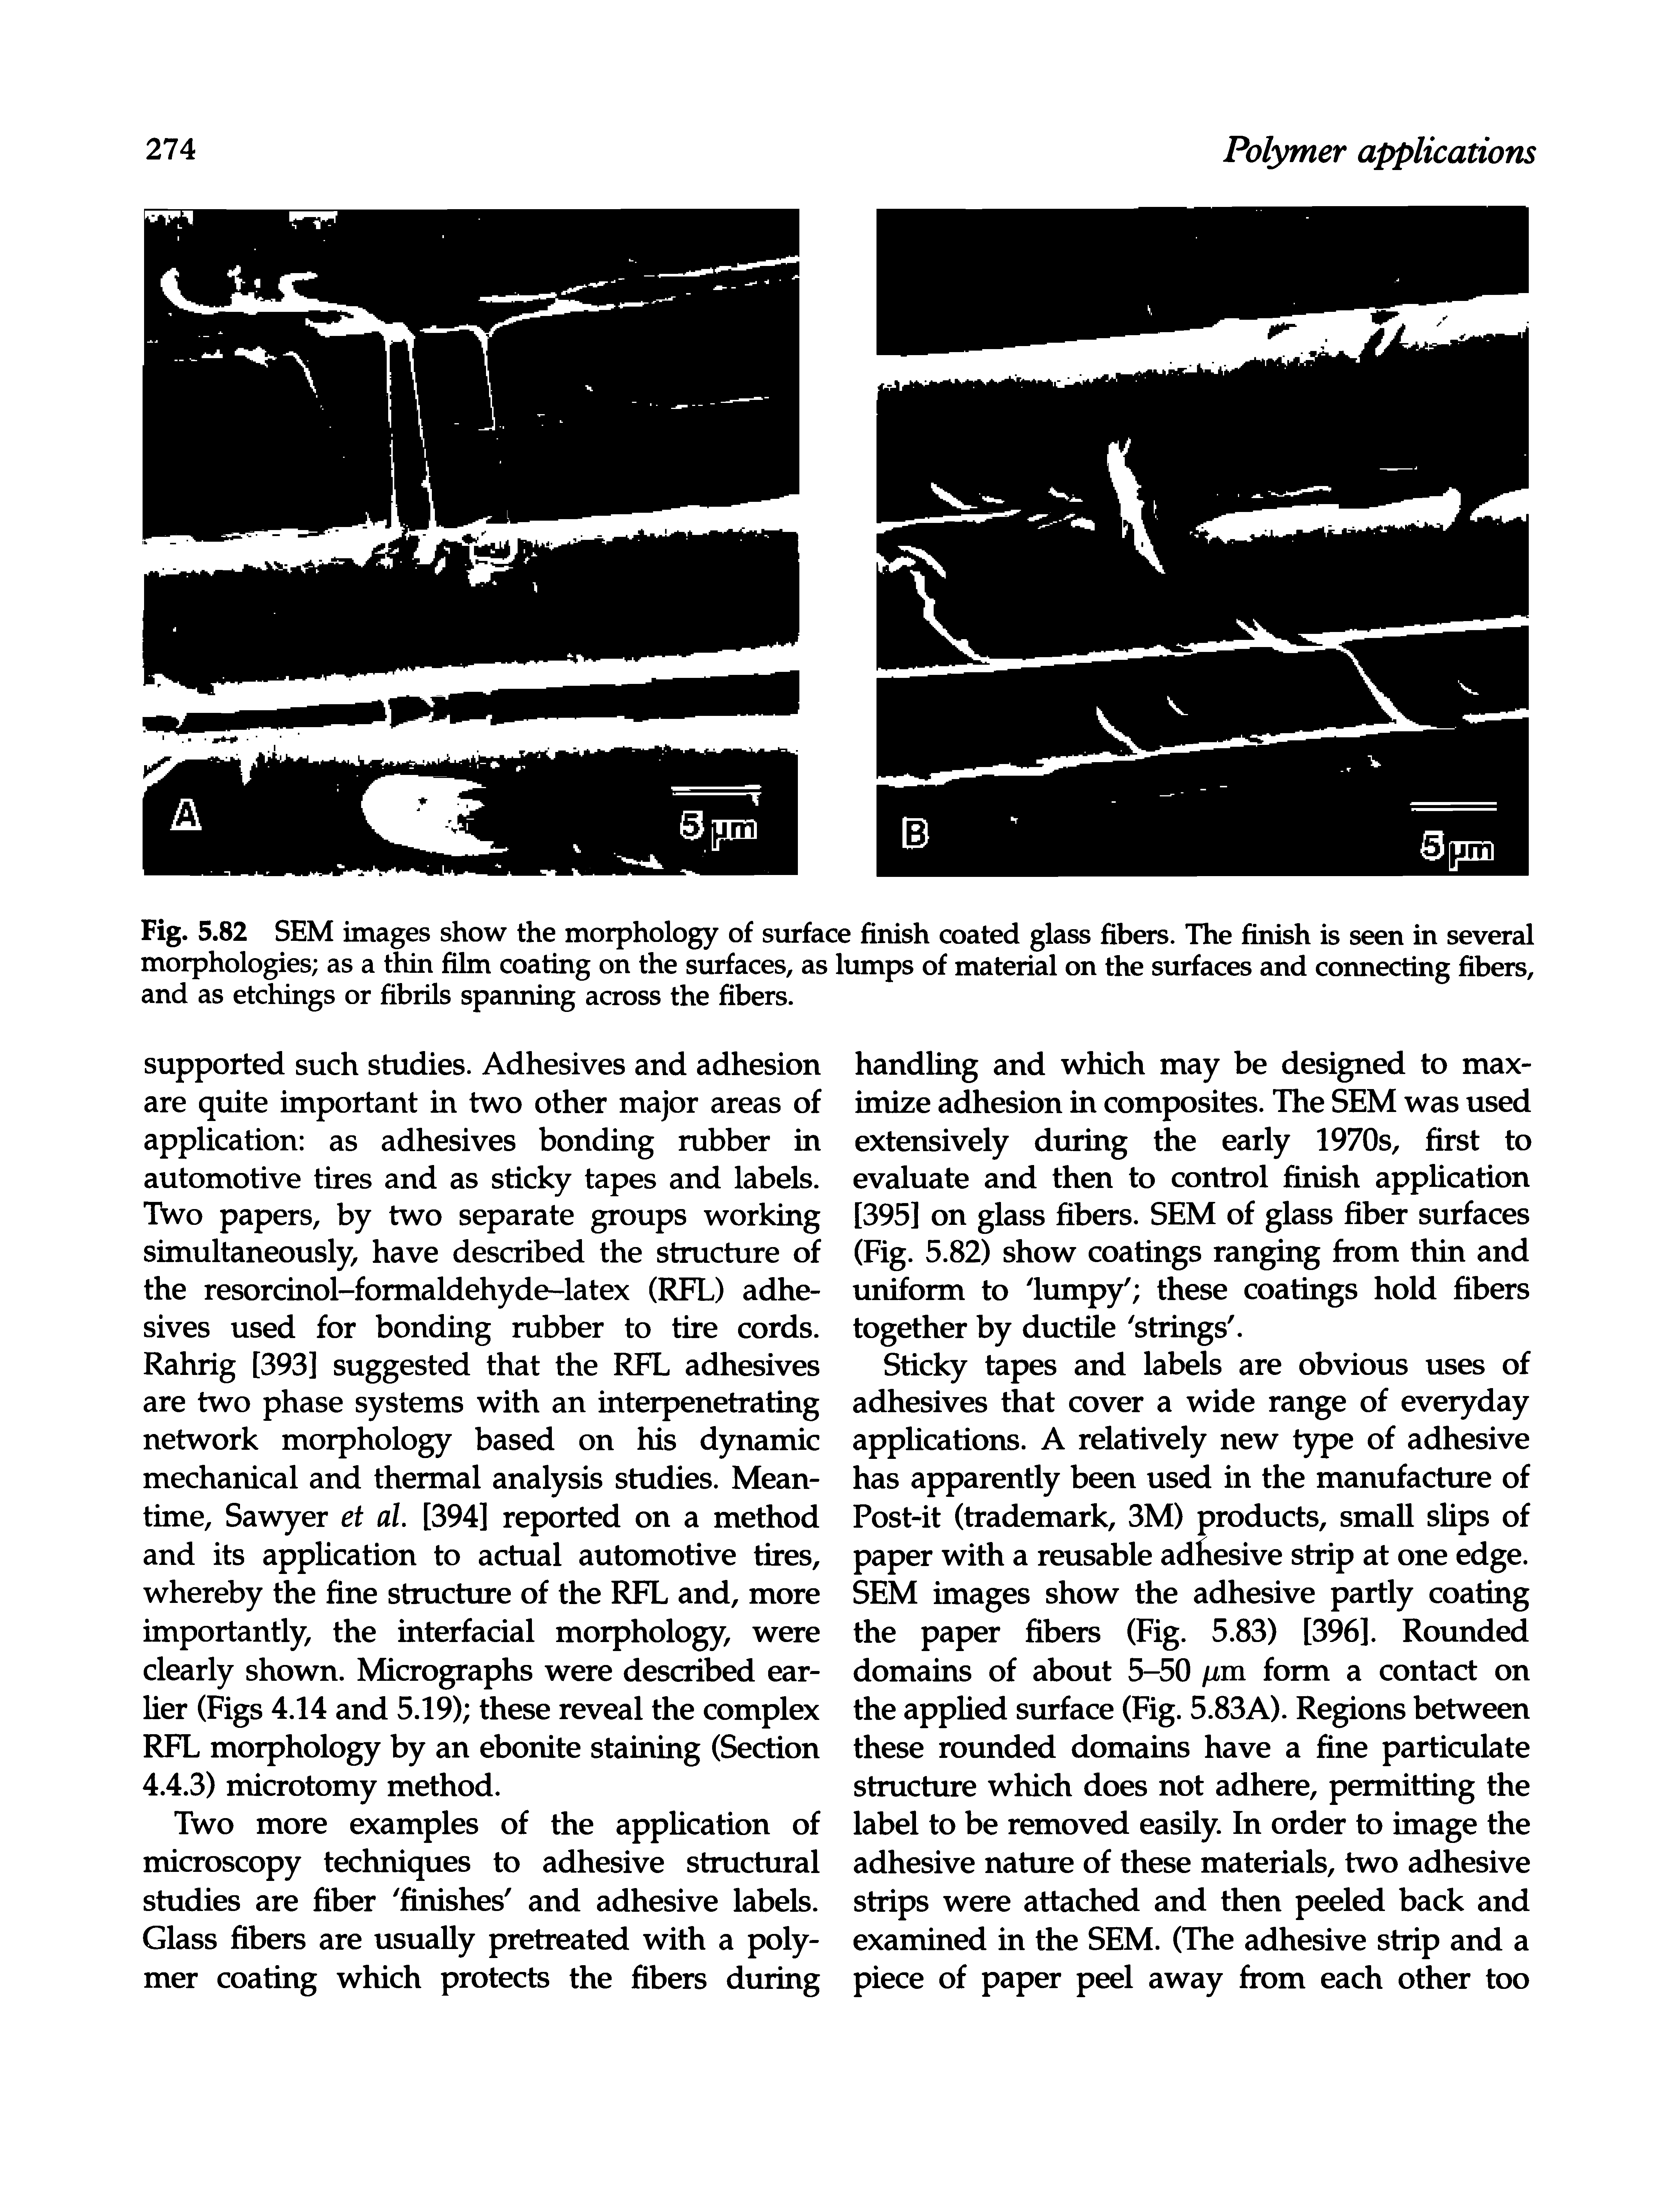 Fig. 5.82 SEM images show the morphology of surface finish coated glass fibers. The finish is seen in several morphologies as a thin film coating on the surfaces, as lumps of material on the surfaces and connecting fibers, and as etchings or fibrils spanning across the fibers.